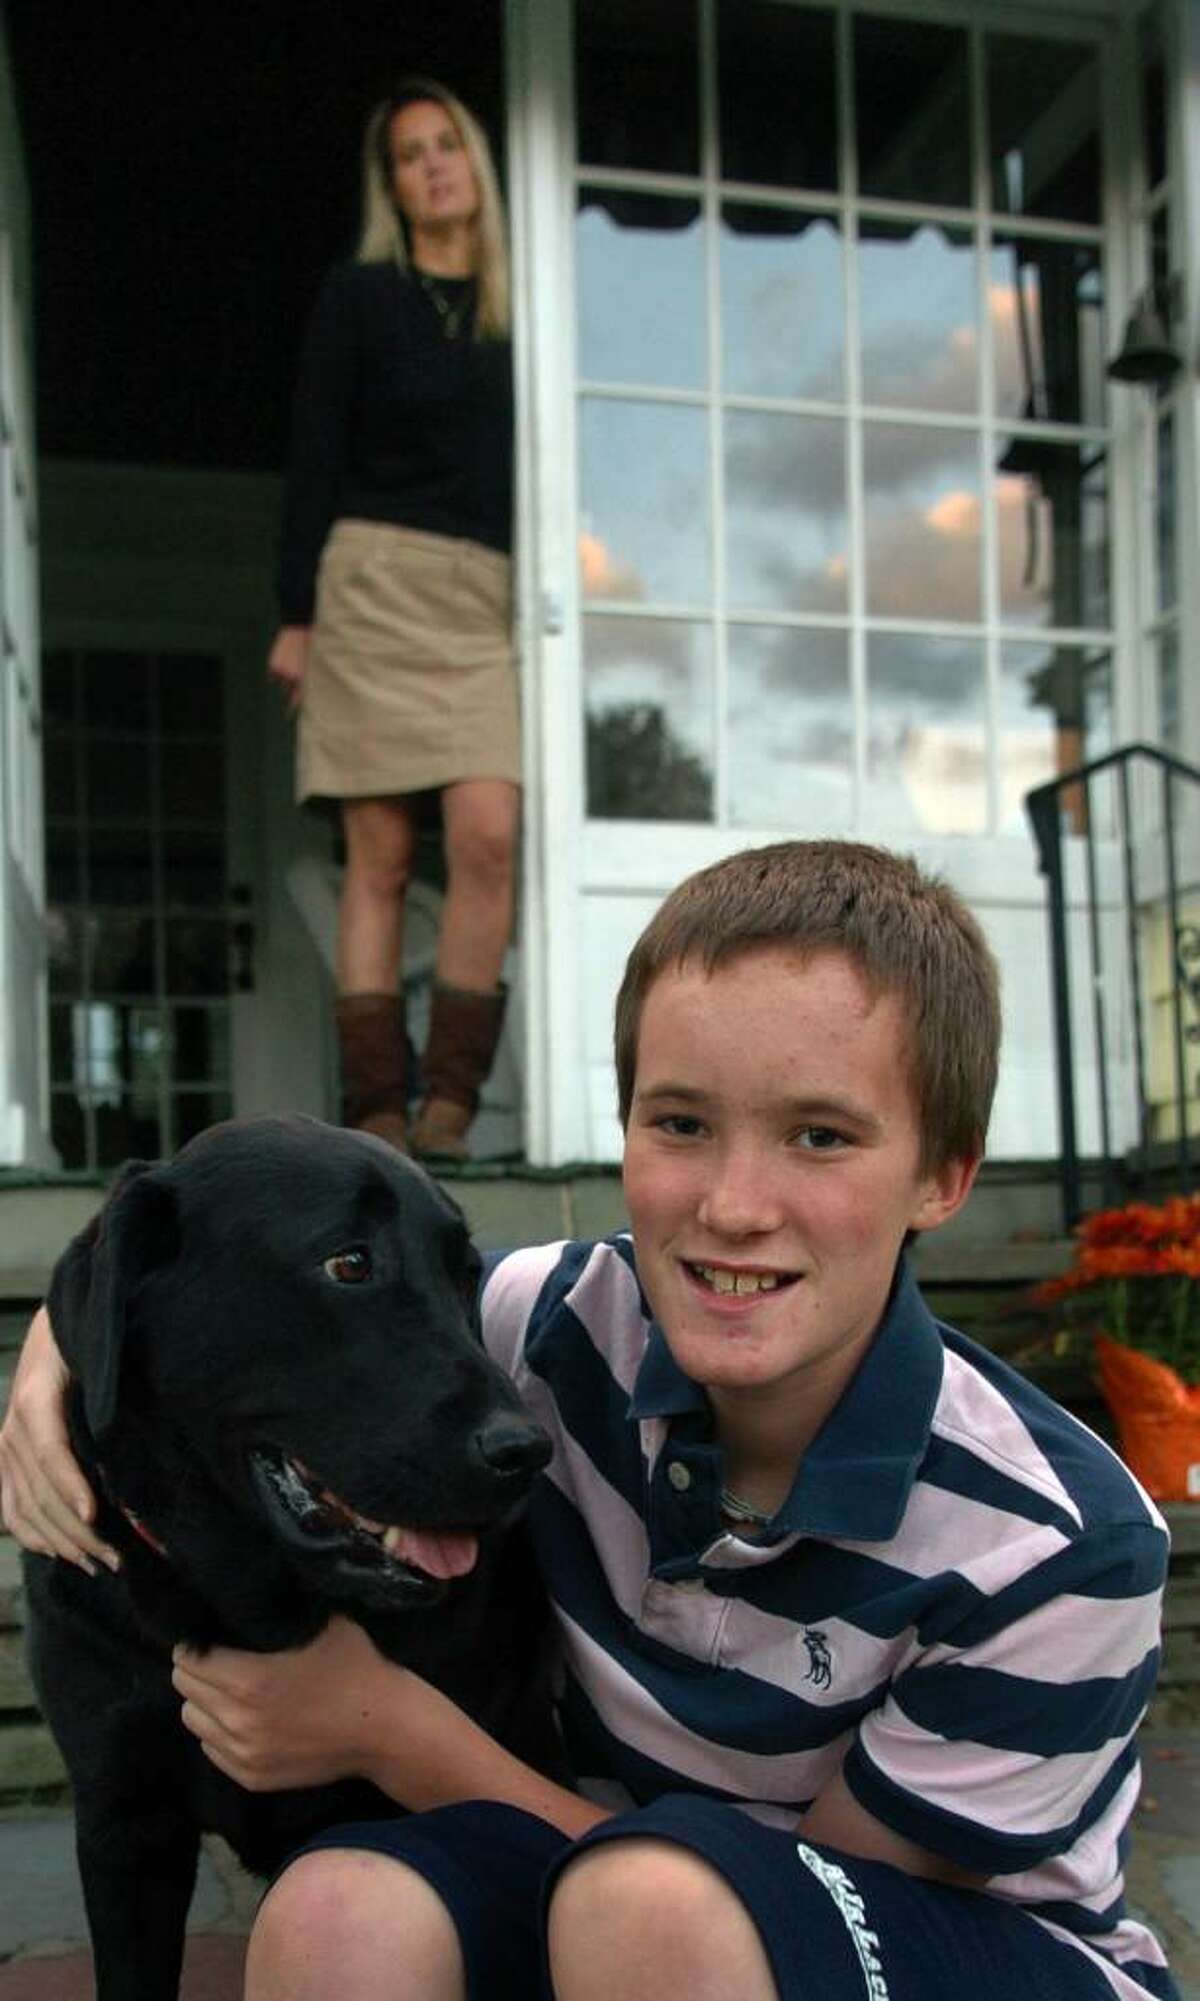 Charlie Snedaker, 12, poses with his dog Lucy while at home in Norwalk, Conn. on Wednesday Oct. 07, 2009. His mom Price stands in the doorway in the background. Charlie has had several severe concusions, five which happened in the past nine months alone.